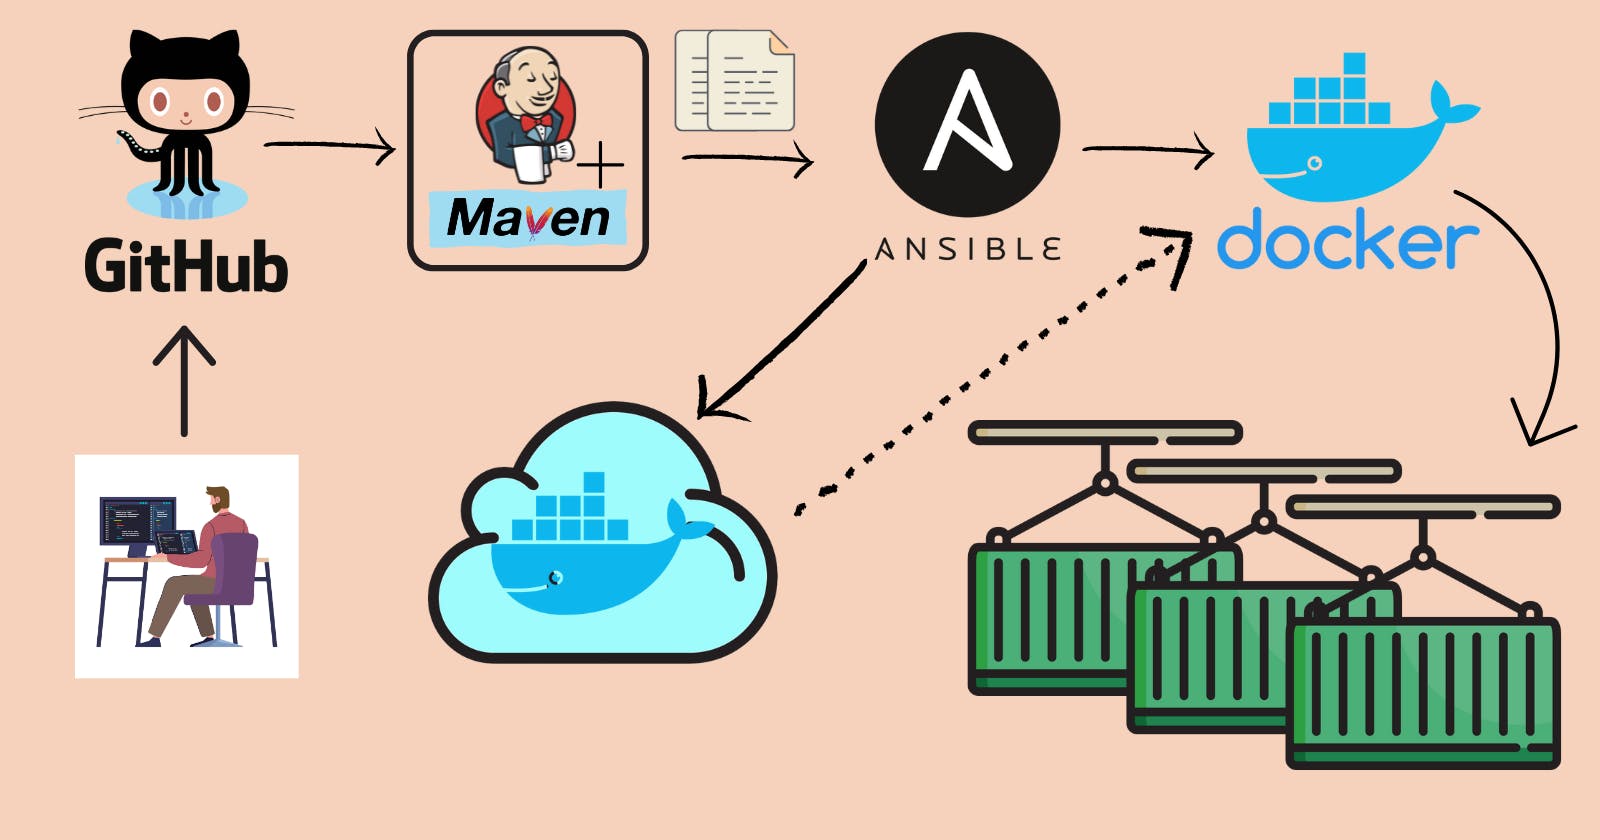 Day 4 CI/CD: Launch Web App with Jenkins, Ansible, and Docker